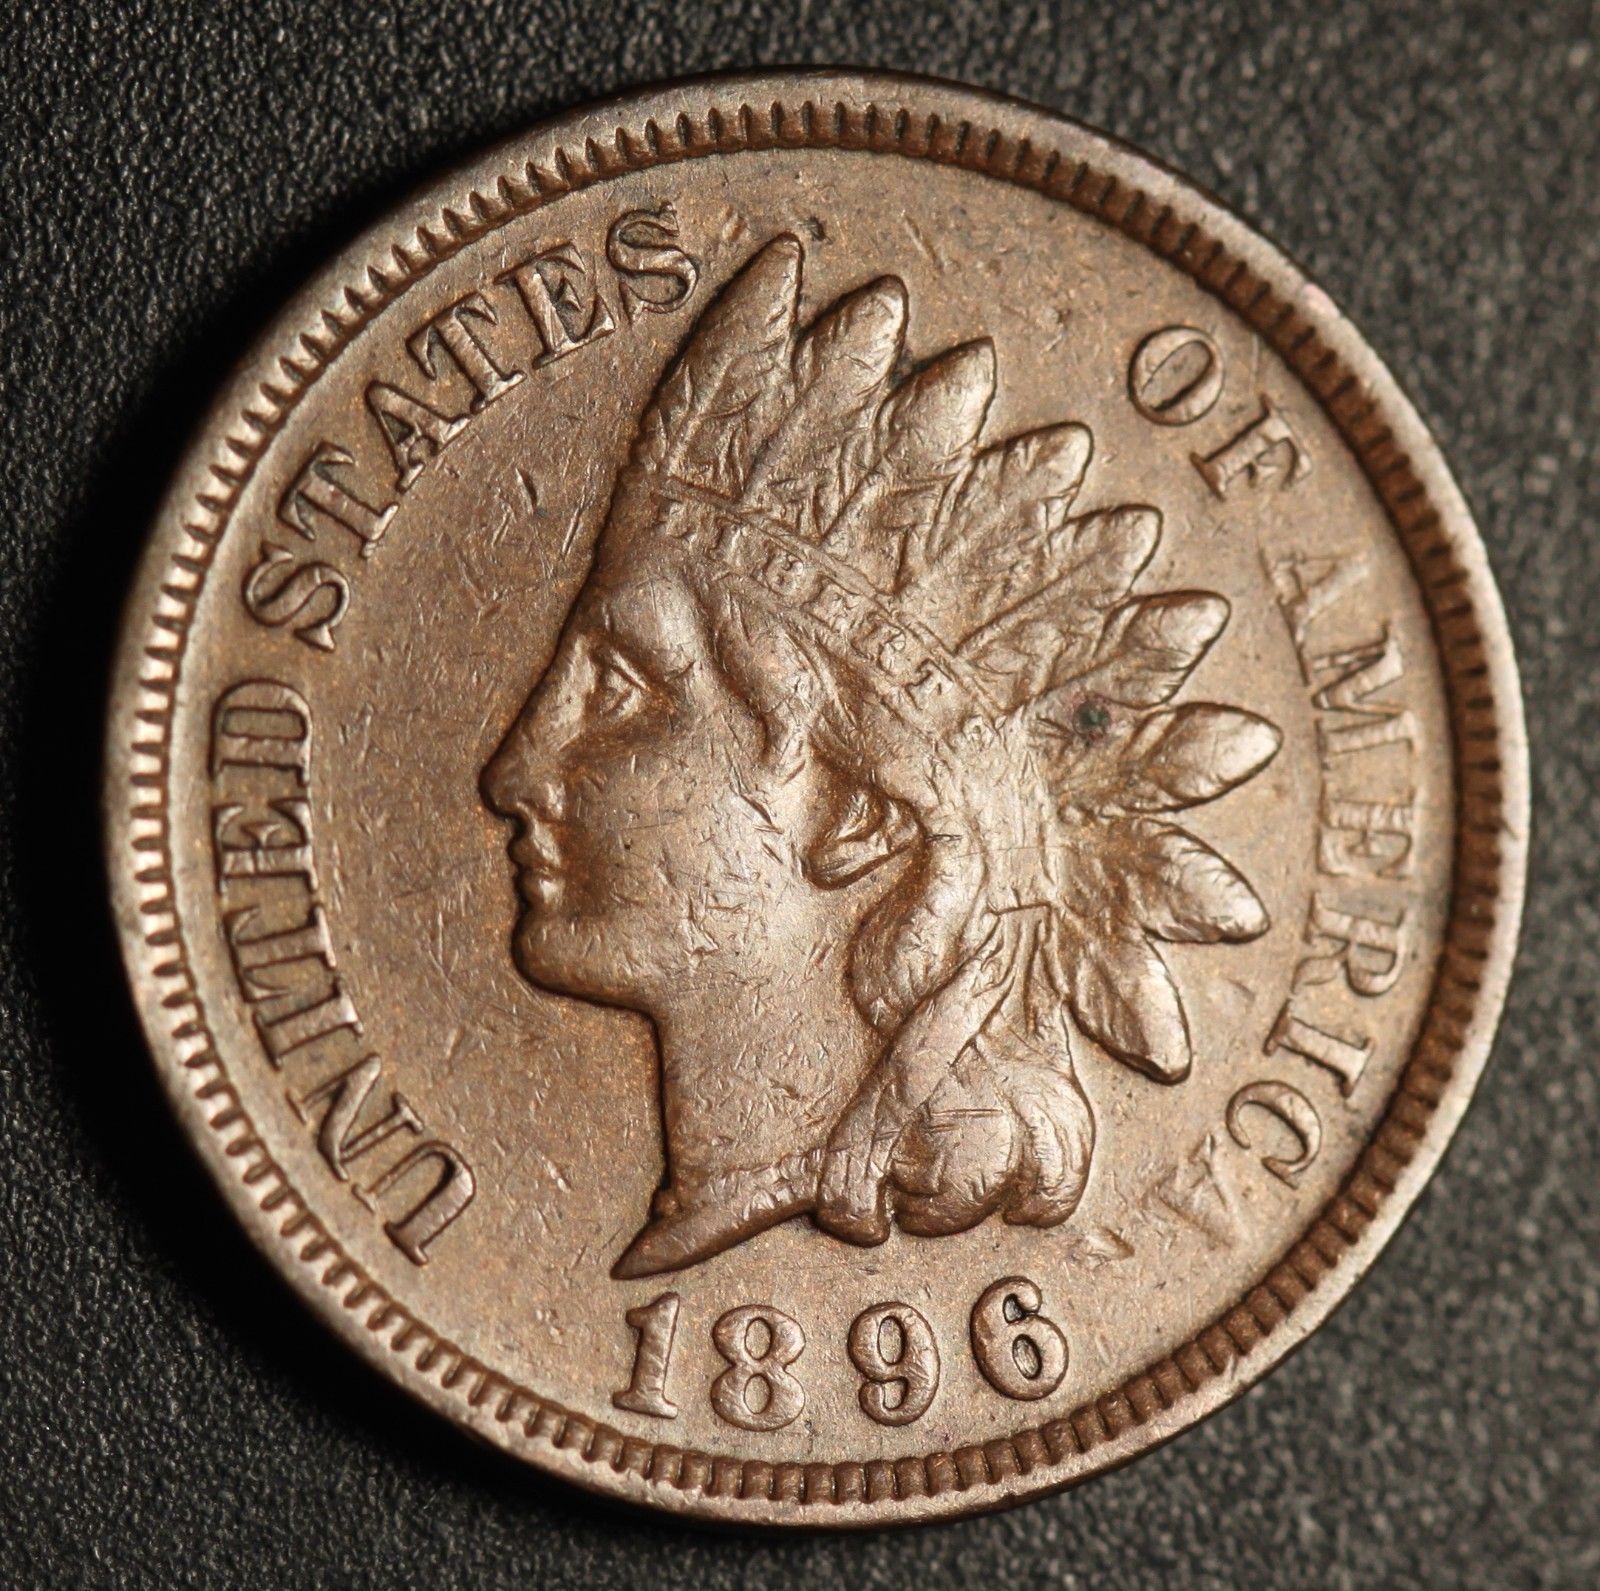 1896 RPD-021 - Indian Head Penny - Photo by Ed Nathanson